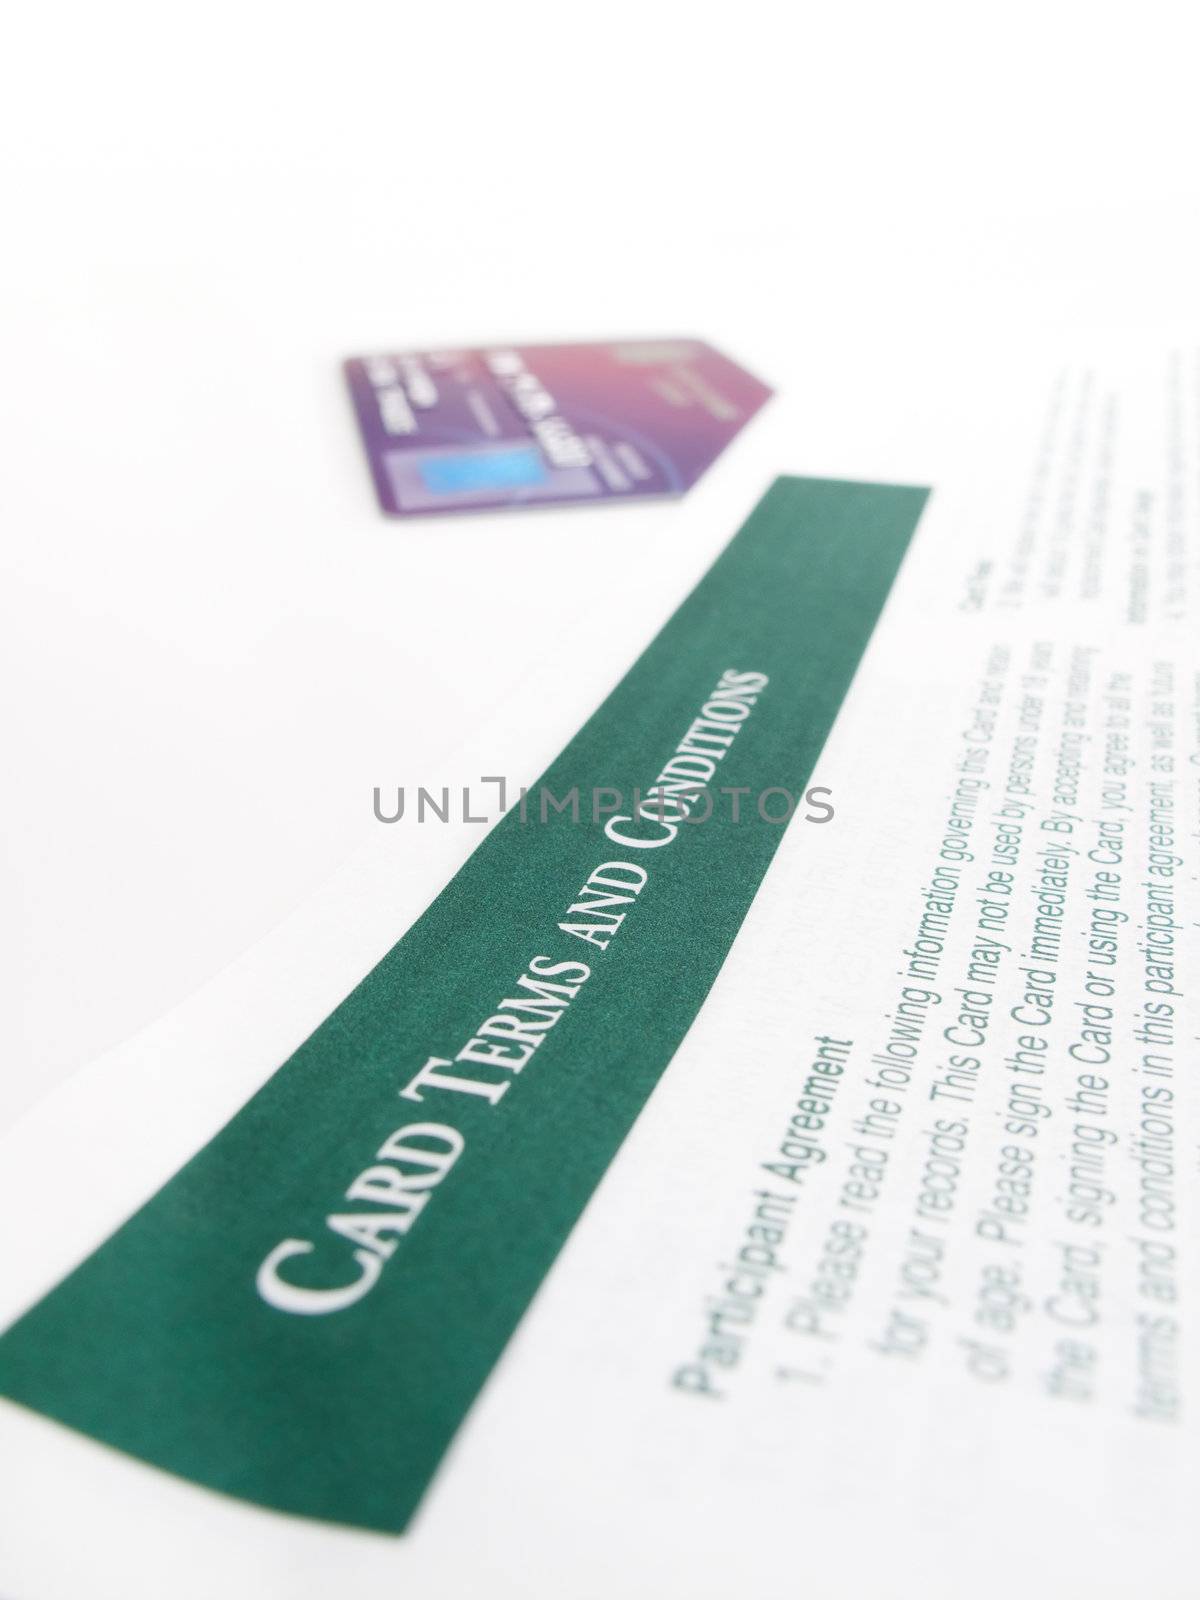 Credit card terms and conditions, with a credit card in the background.